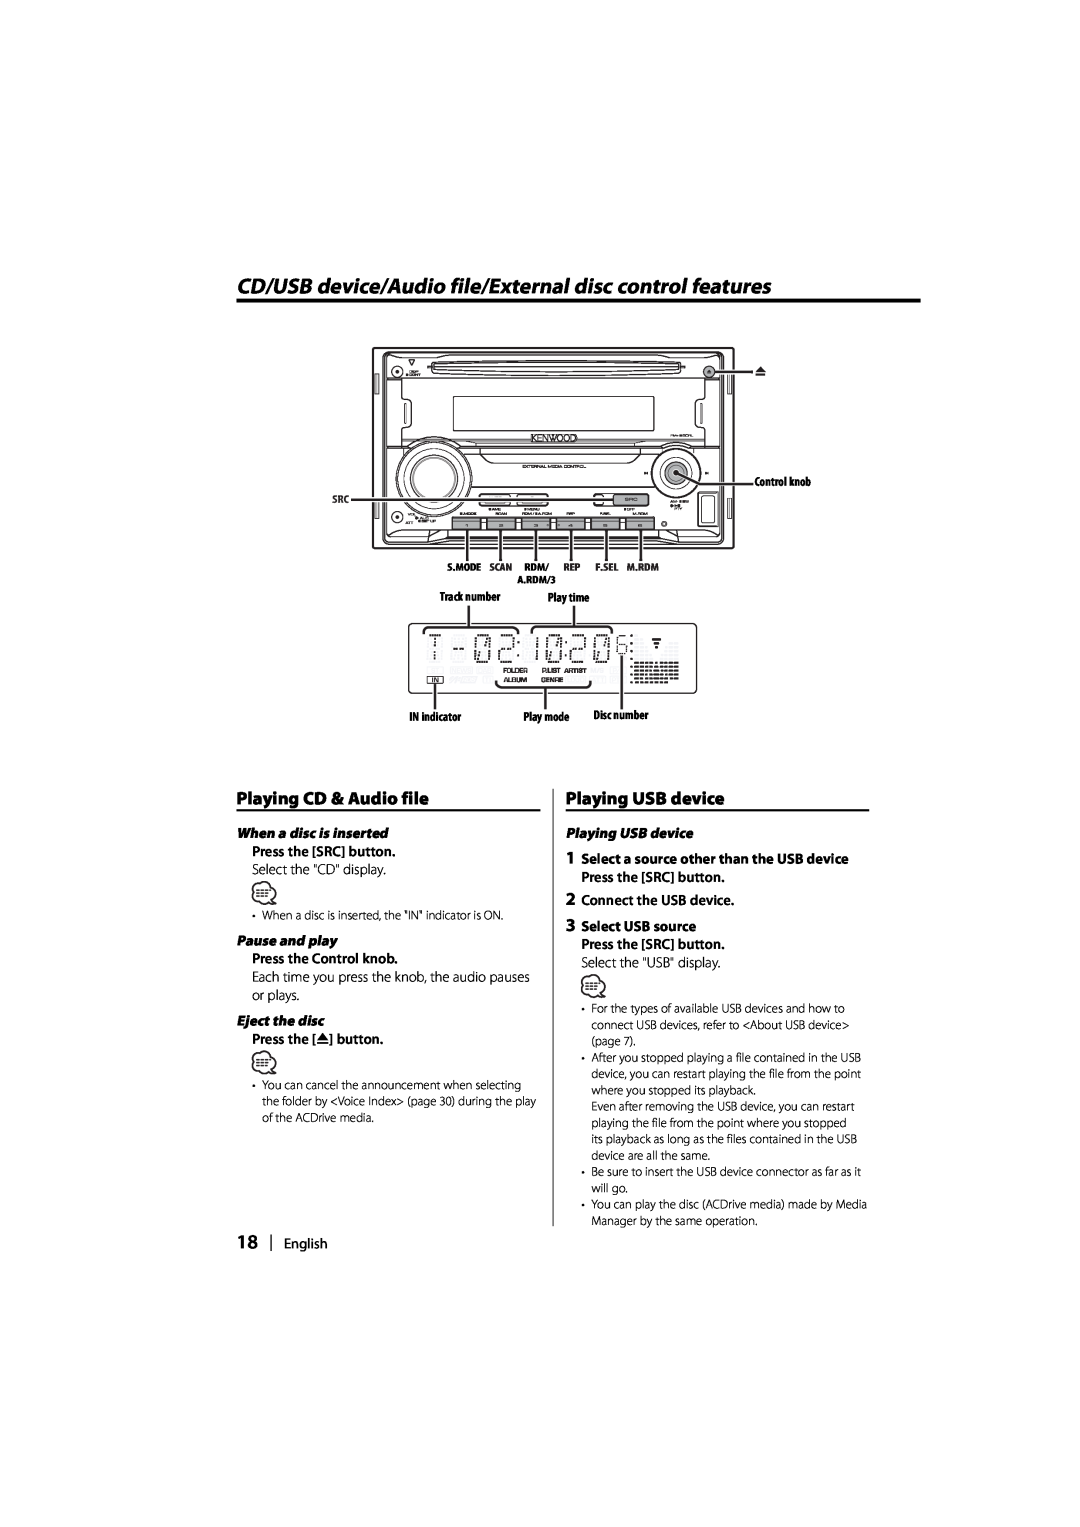 Kenwood DPX-MP2090U Playing CD & Audio file, Playing USB device, When a disc is inserted, Pause and play, Eject the disc 